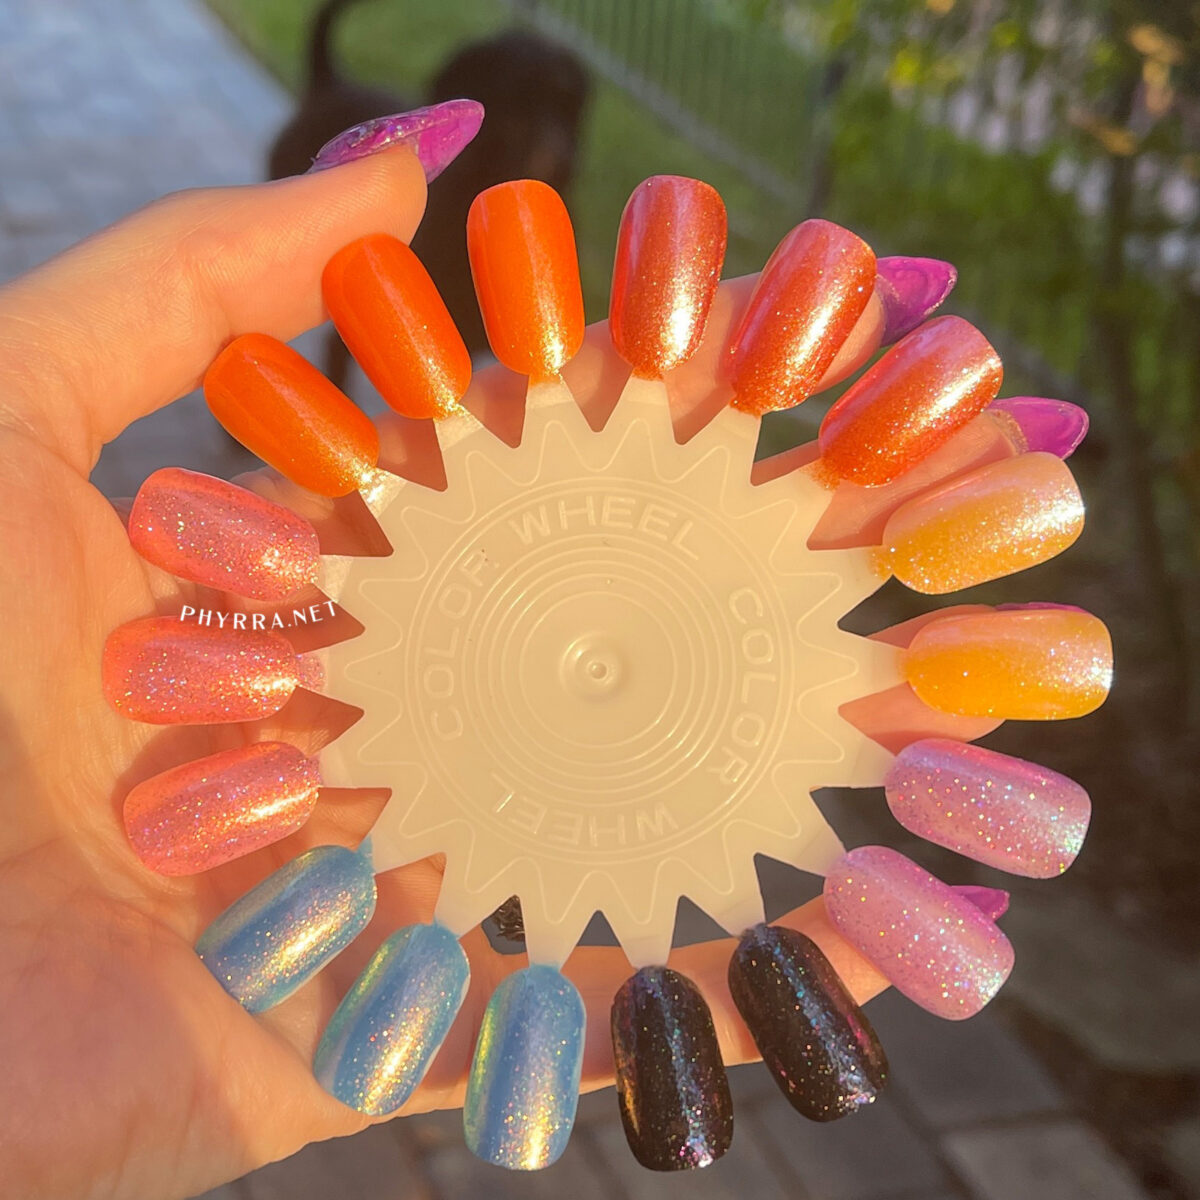 Can You Dig It?, Queening, Hamilton, Shimmering Sunburst swatches in direct sun